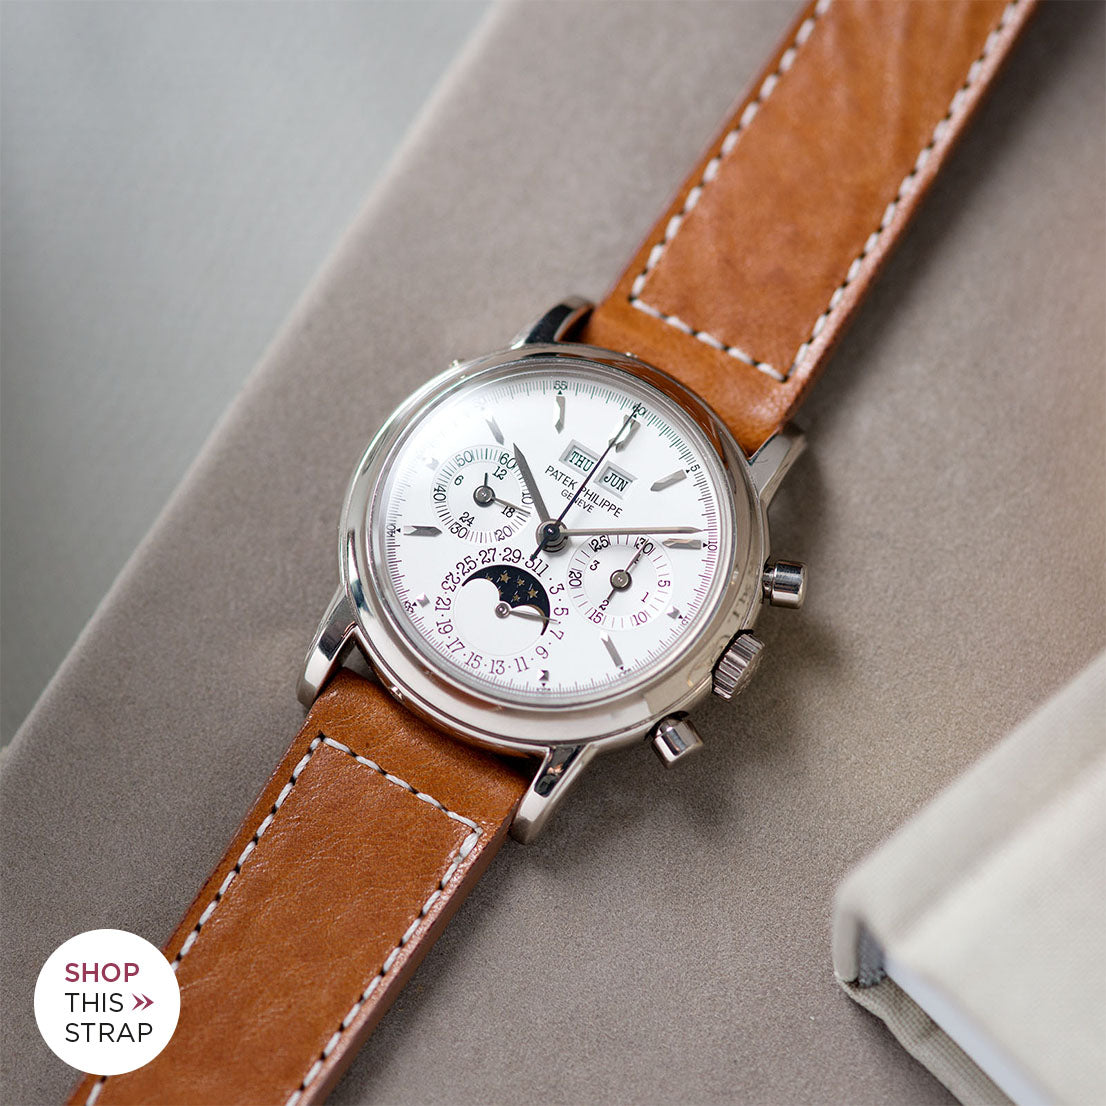 Bulang and Sons_Strap Guide_The Patek Philippe 3970 G White Gold Perpetual Calendar_Gilt Brown Leather Watch Strap